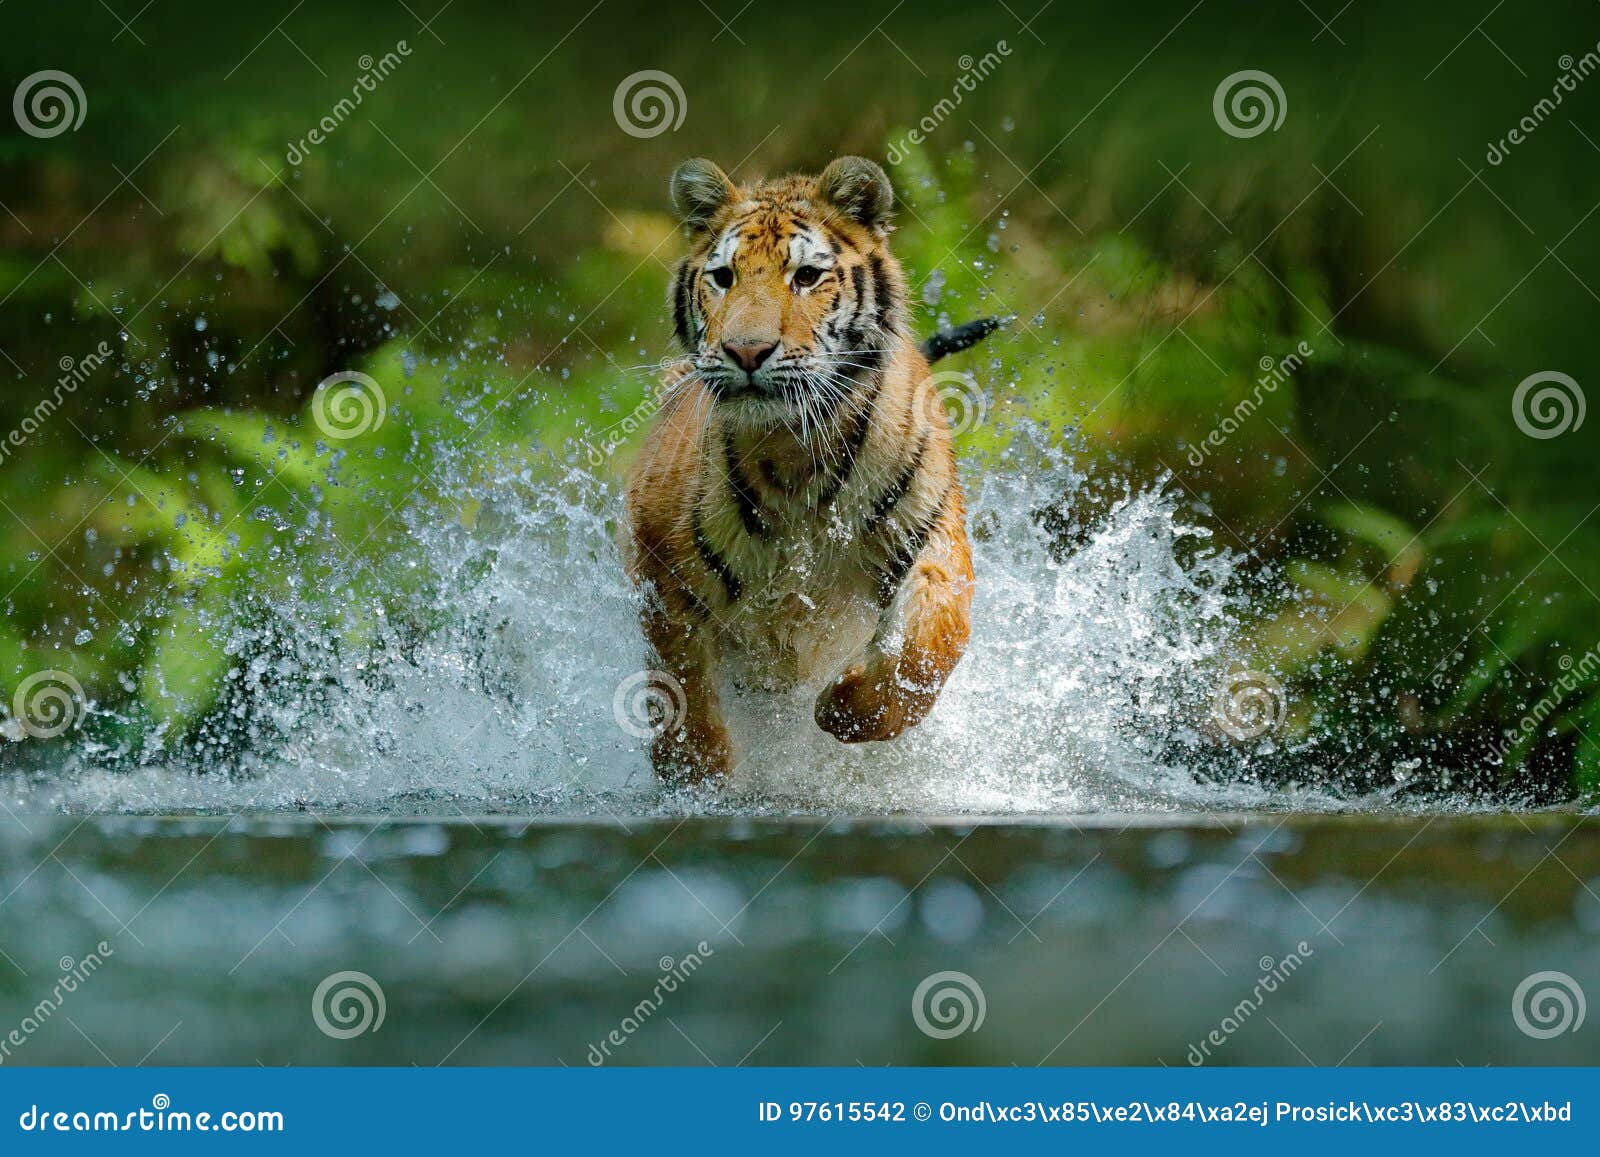 tiger running in water. danger animal, tajga in russia. animal in the forest stream. grey stone, river droplet. tiger with splash